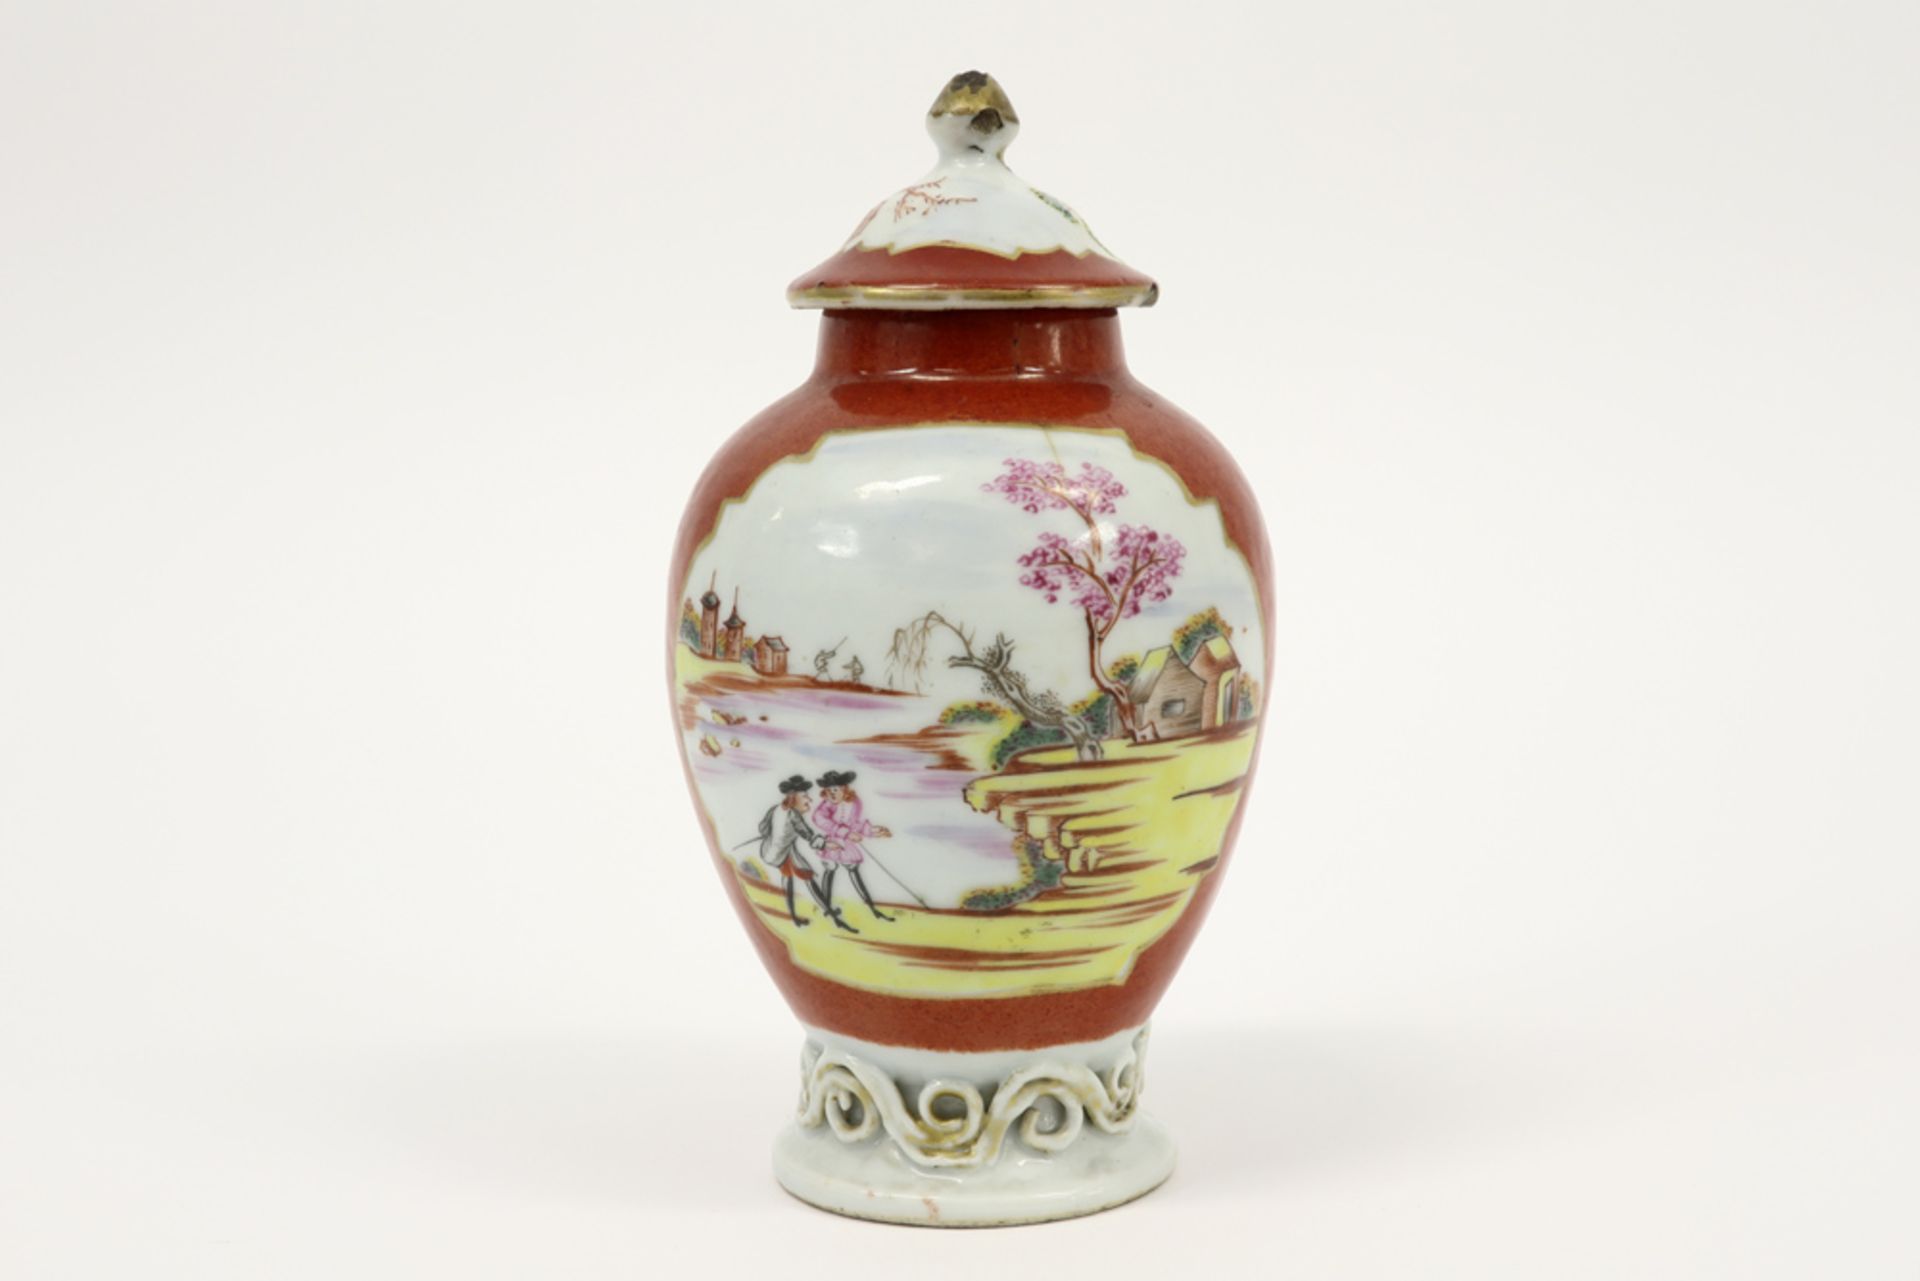 18th Cent. Chinese lidded teacaddy in porcelain with a polychrome European decor with figures in a - Image 3 of 5